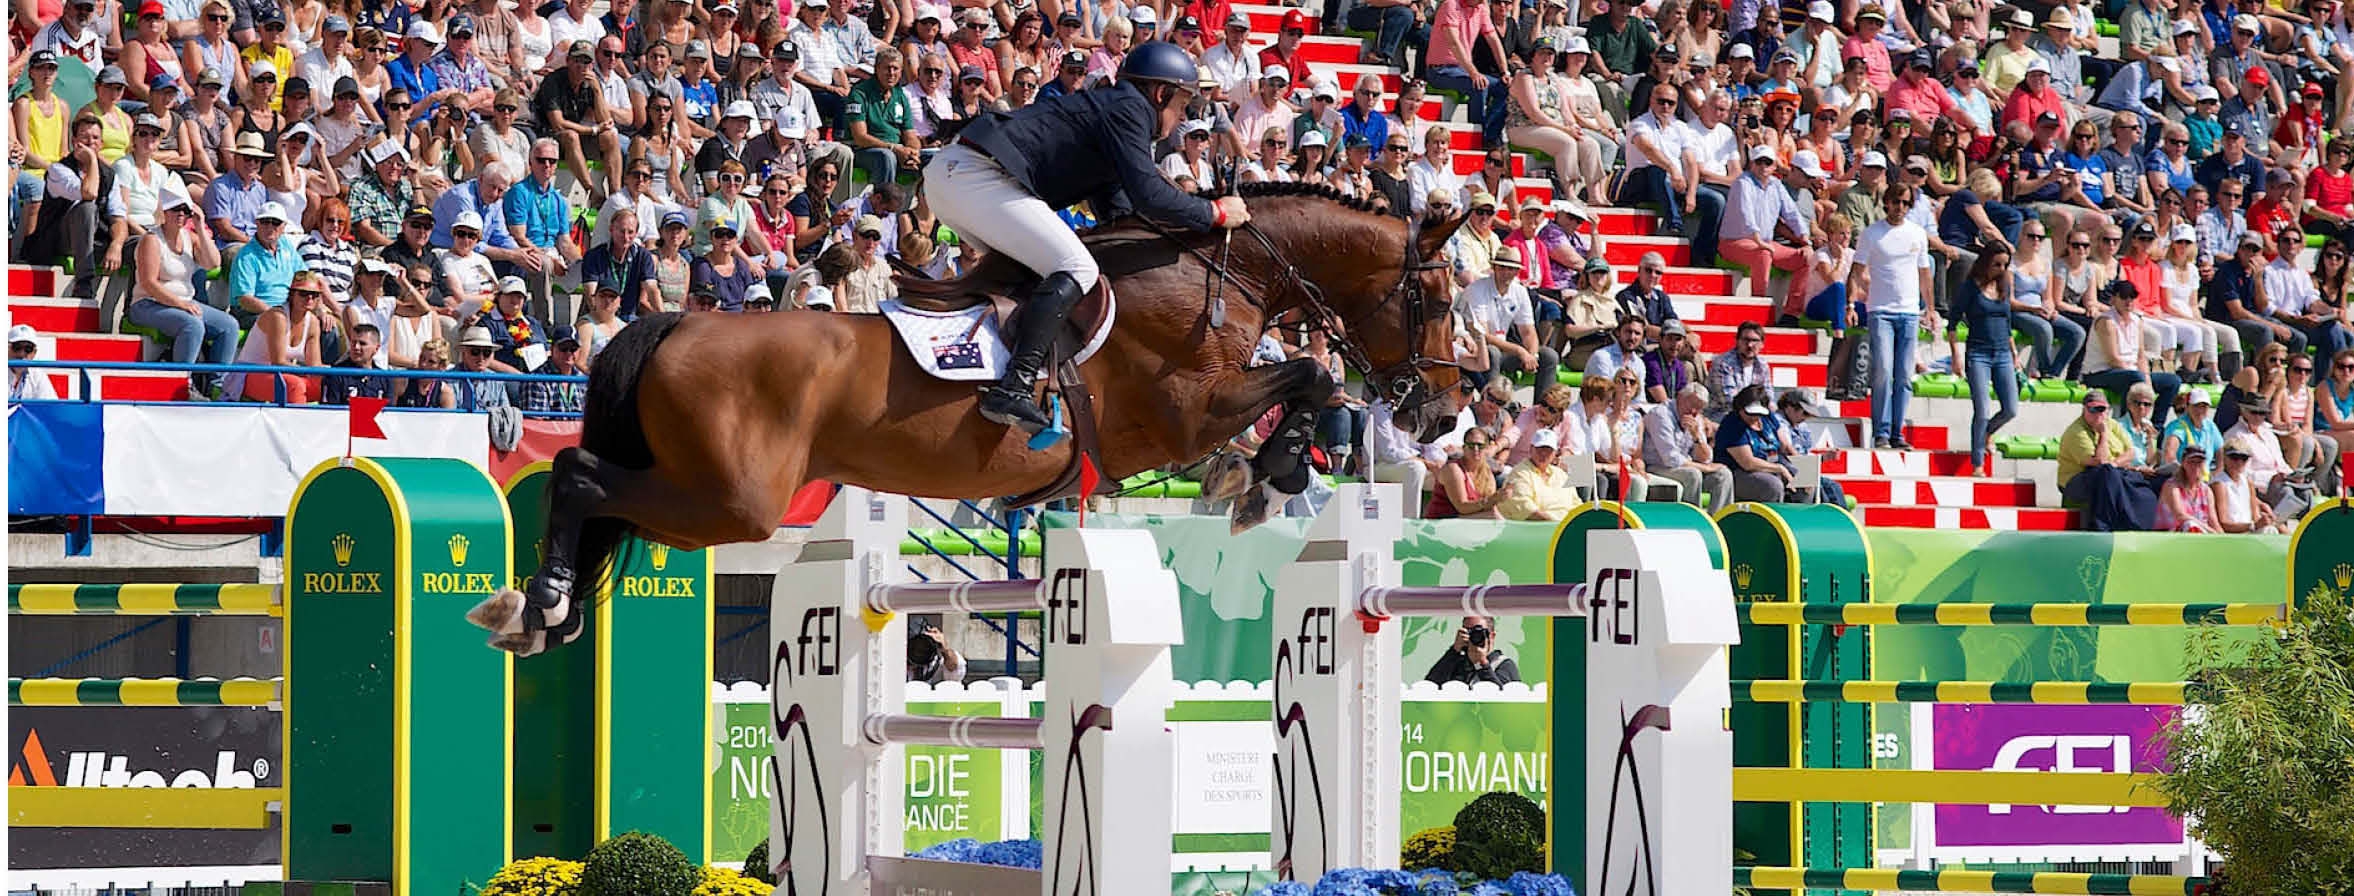 Show Jumping wallpapers, Sports, HQ Show Jumping pictures 4K